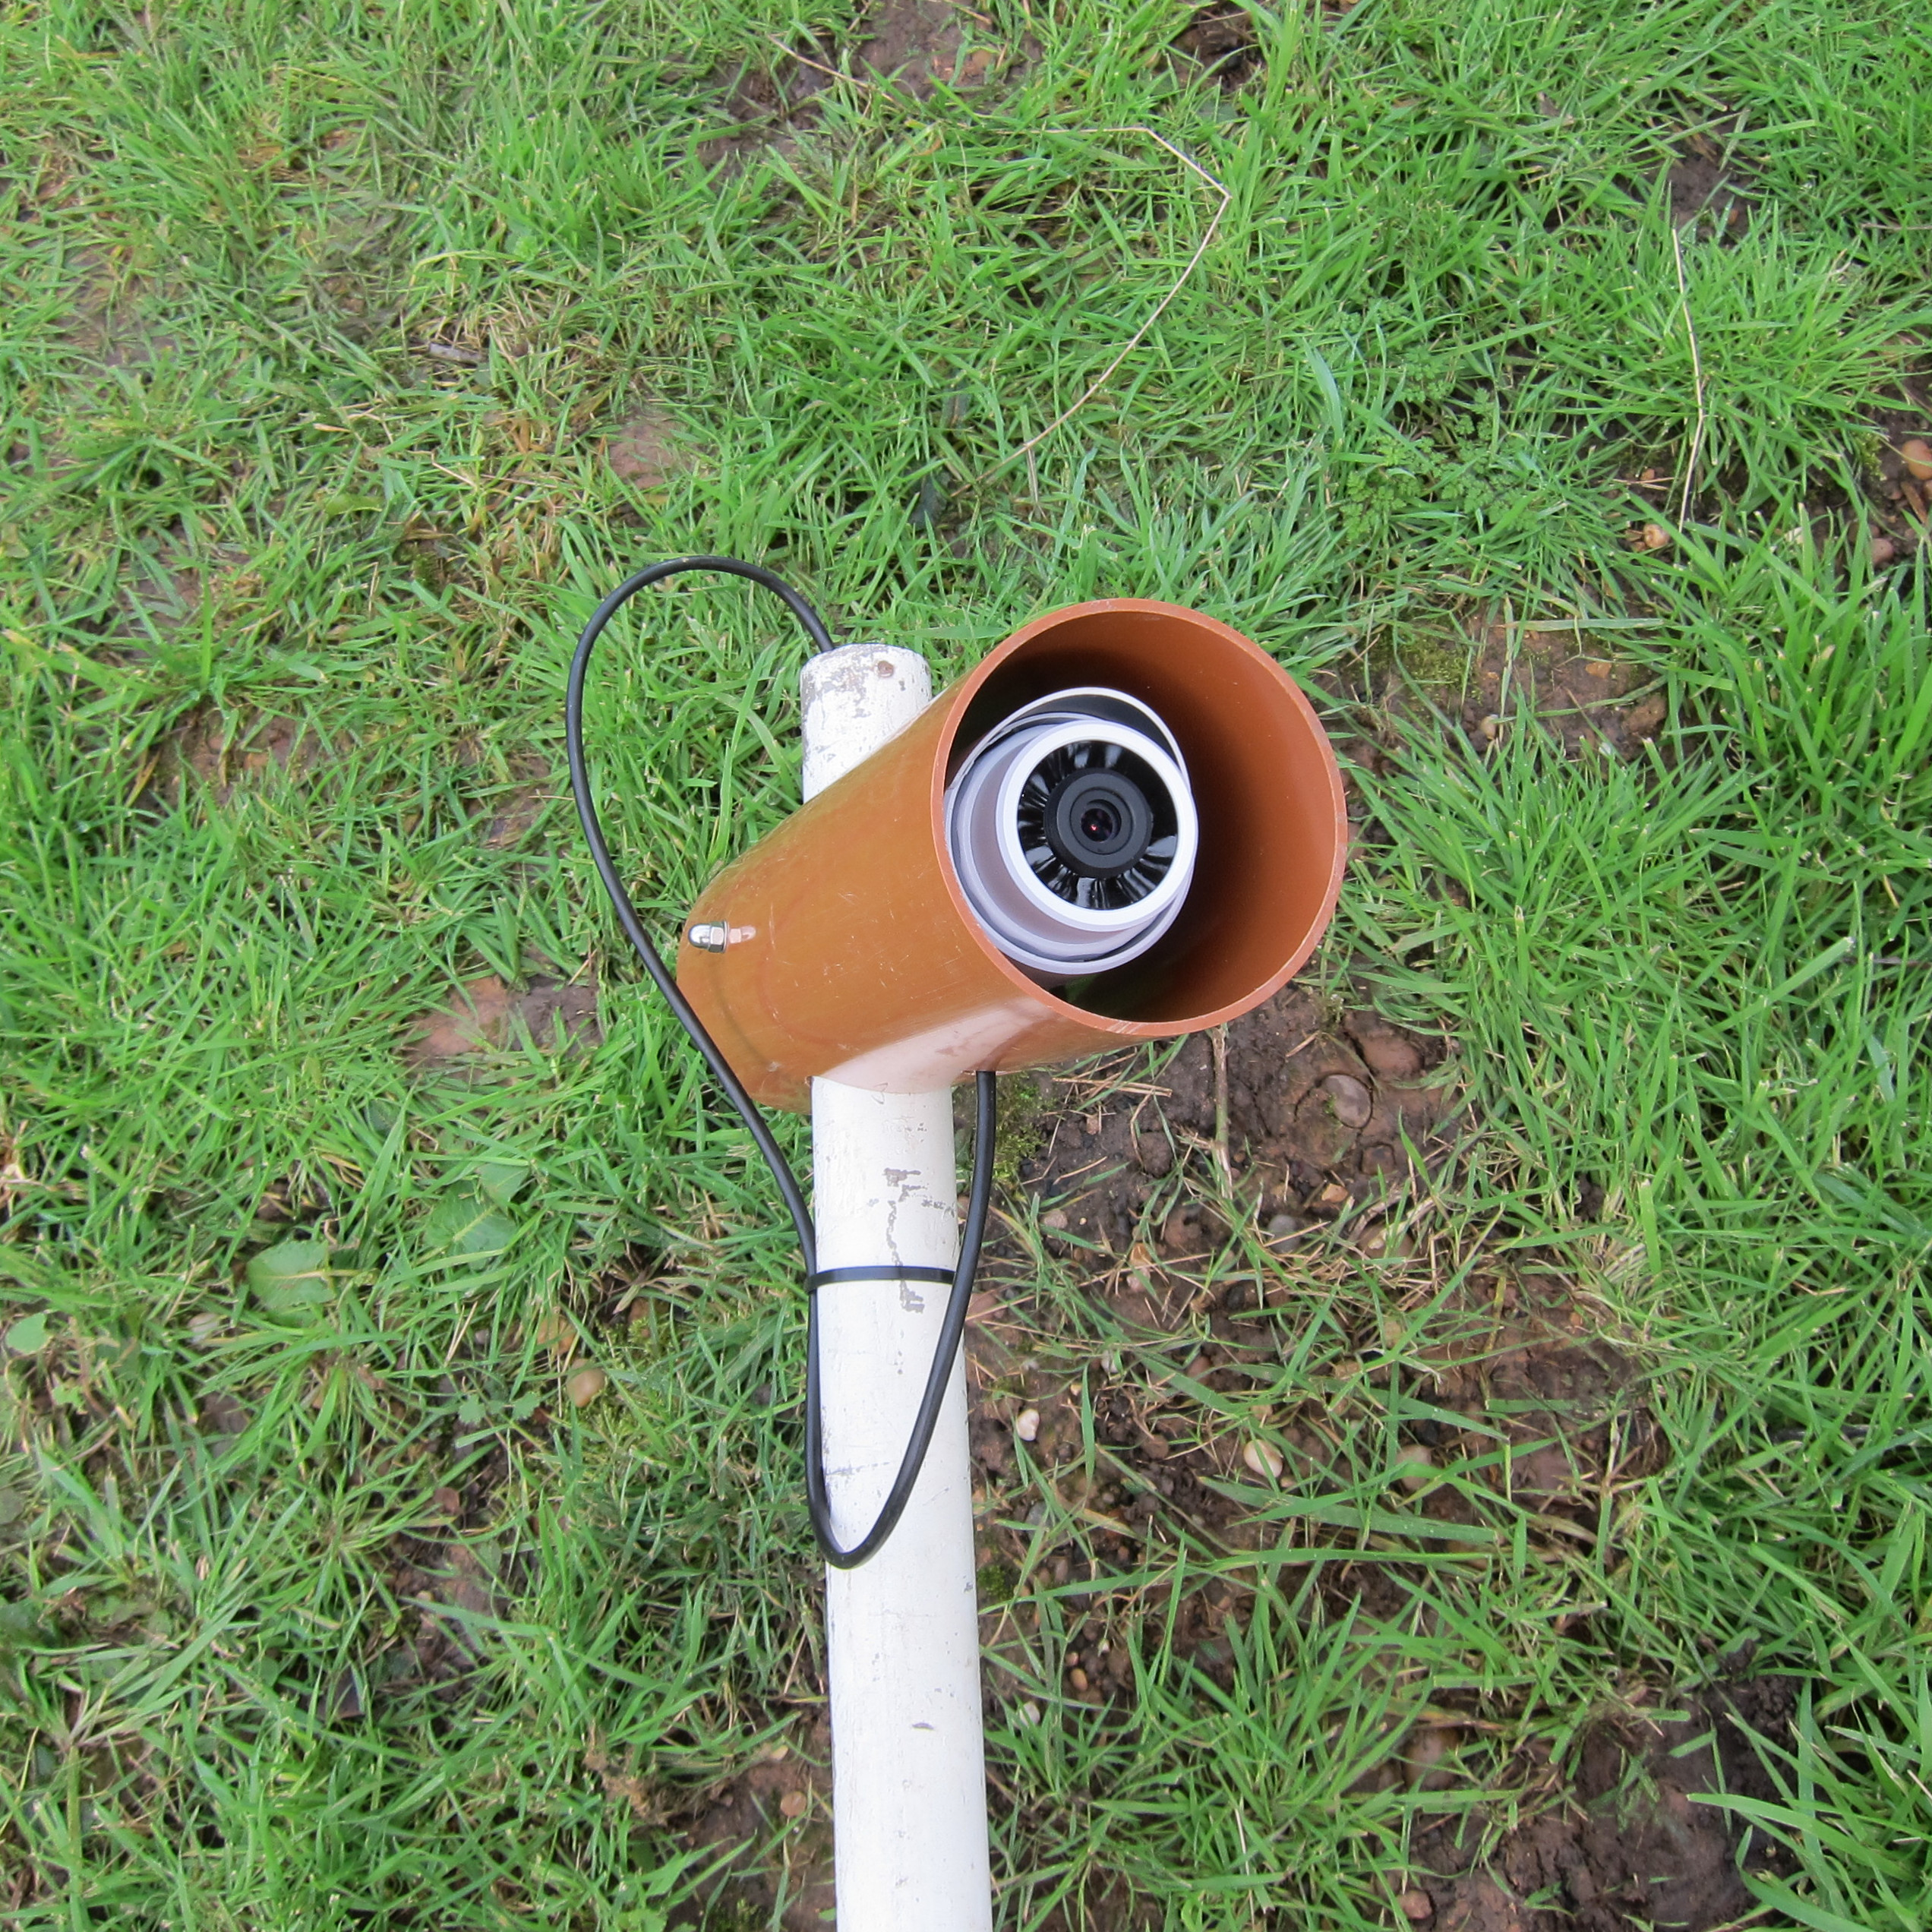 UniFi Video Camera fitted to pole, protected by drain pipe